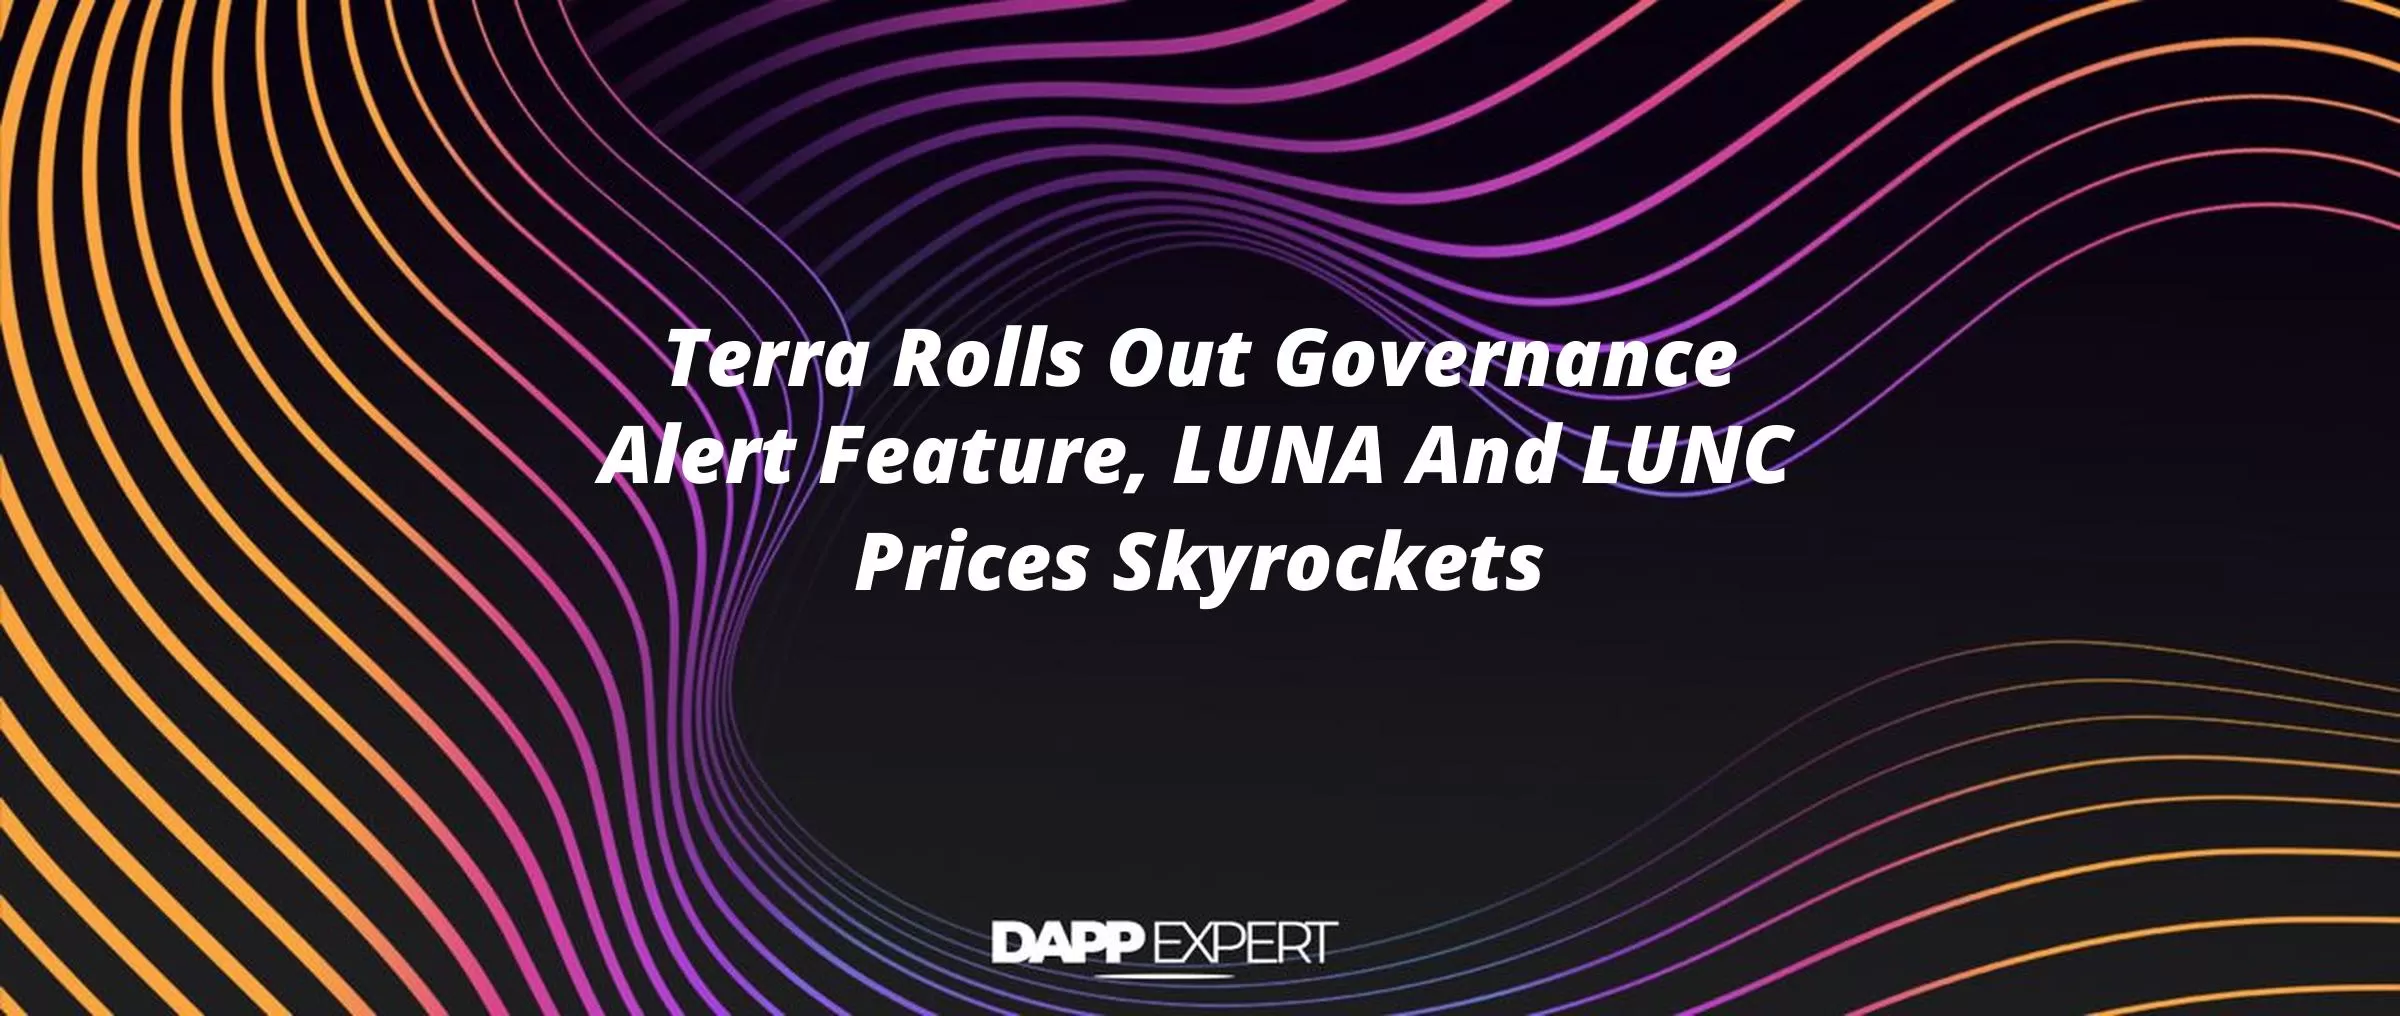 Terra Rolls Out Governance Alert Feature, LUNA And LUNC Prices Skyrockets